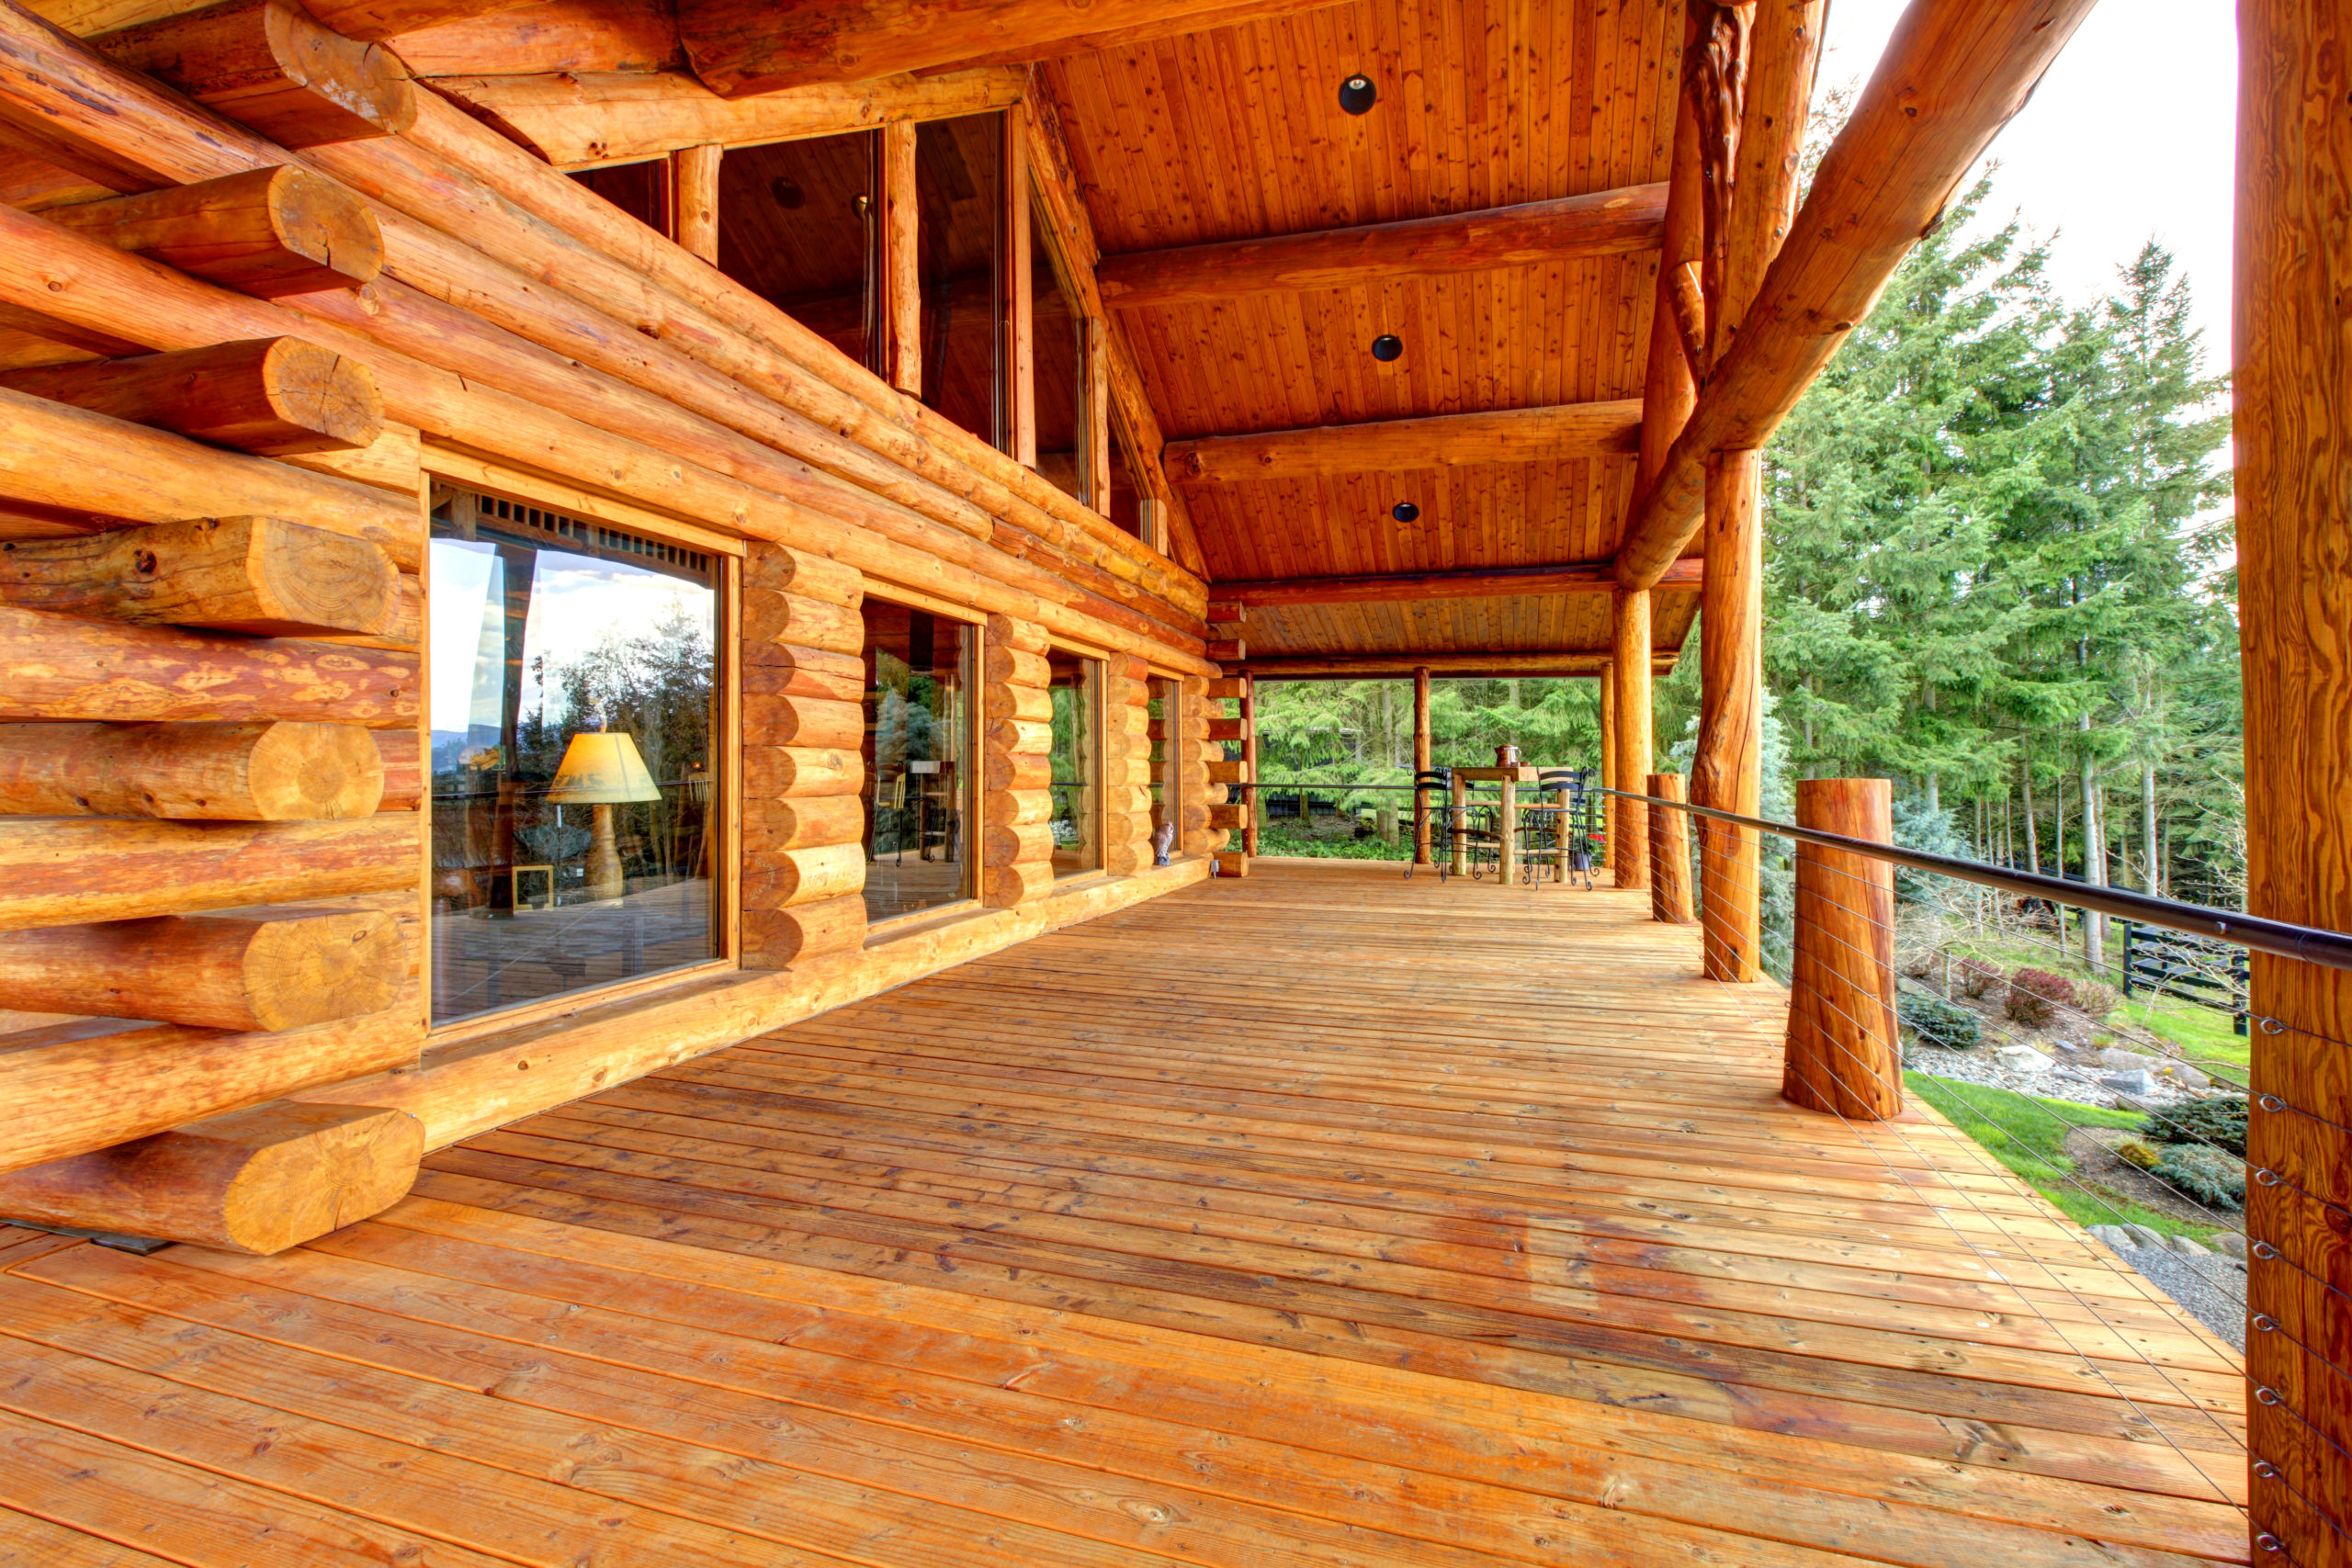 5 Tips To Help Care For Your Wood Deck